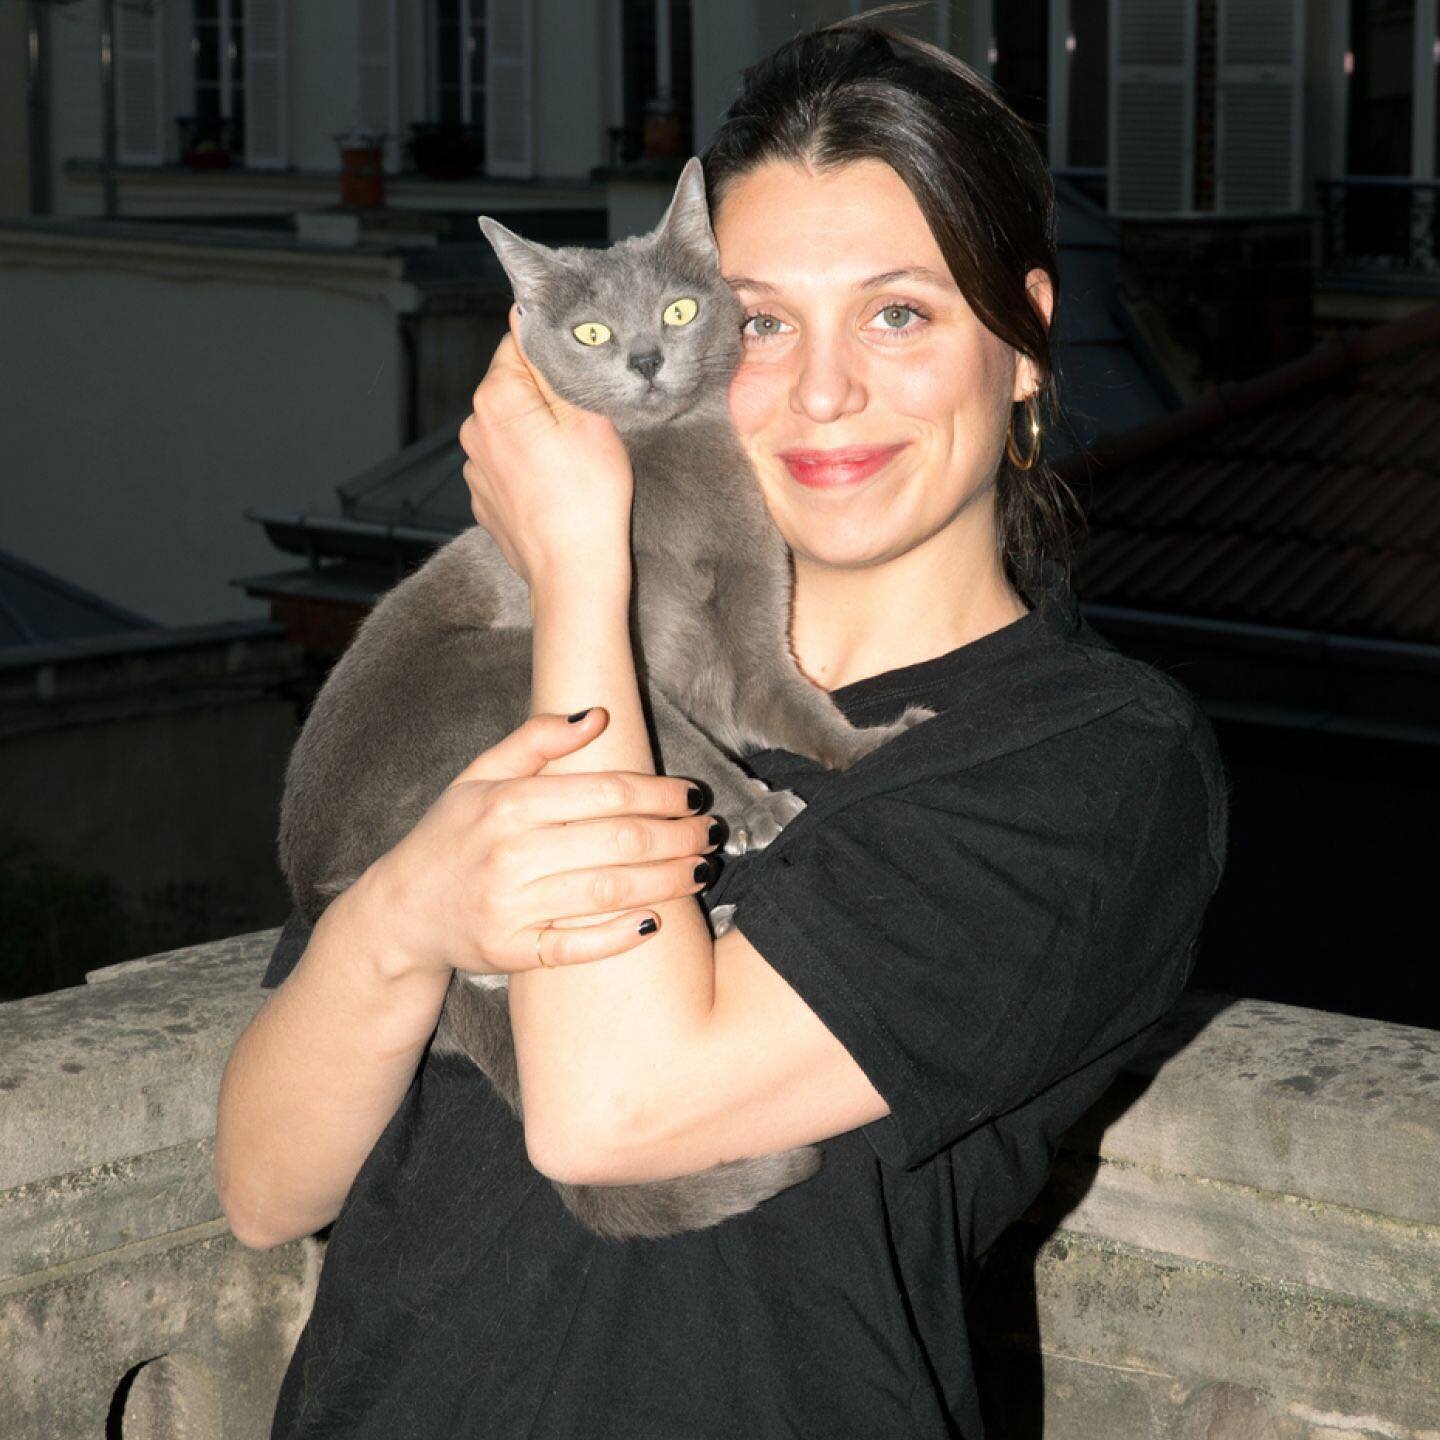 Rendez vous with Marina &amp; Carmen 😎
Because she defines herself as a genuine &ldquo;cat person&rdquo;, Marina began researching breeds of cats: she discovered that Korats are playful, sociable and very attached to the humans they live with. She f